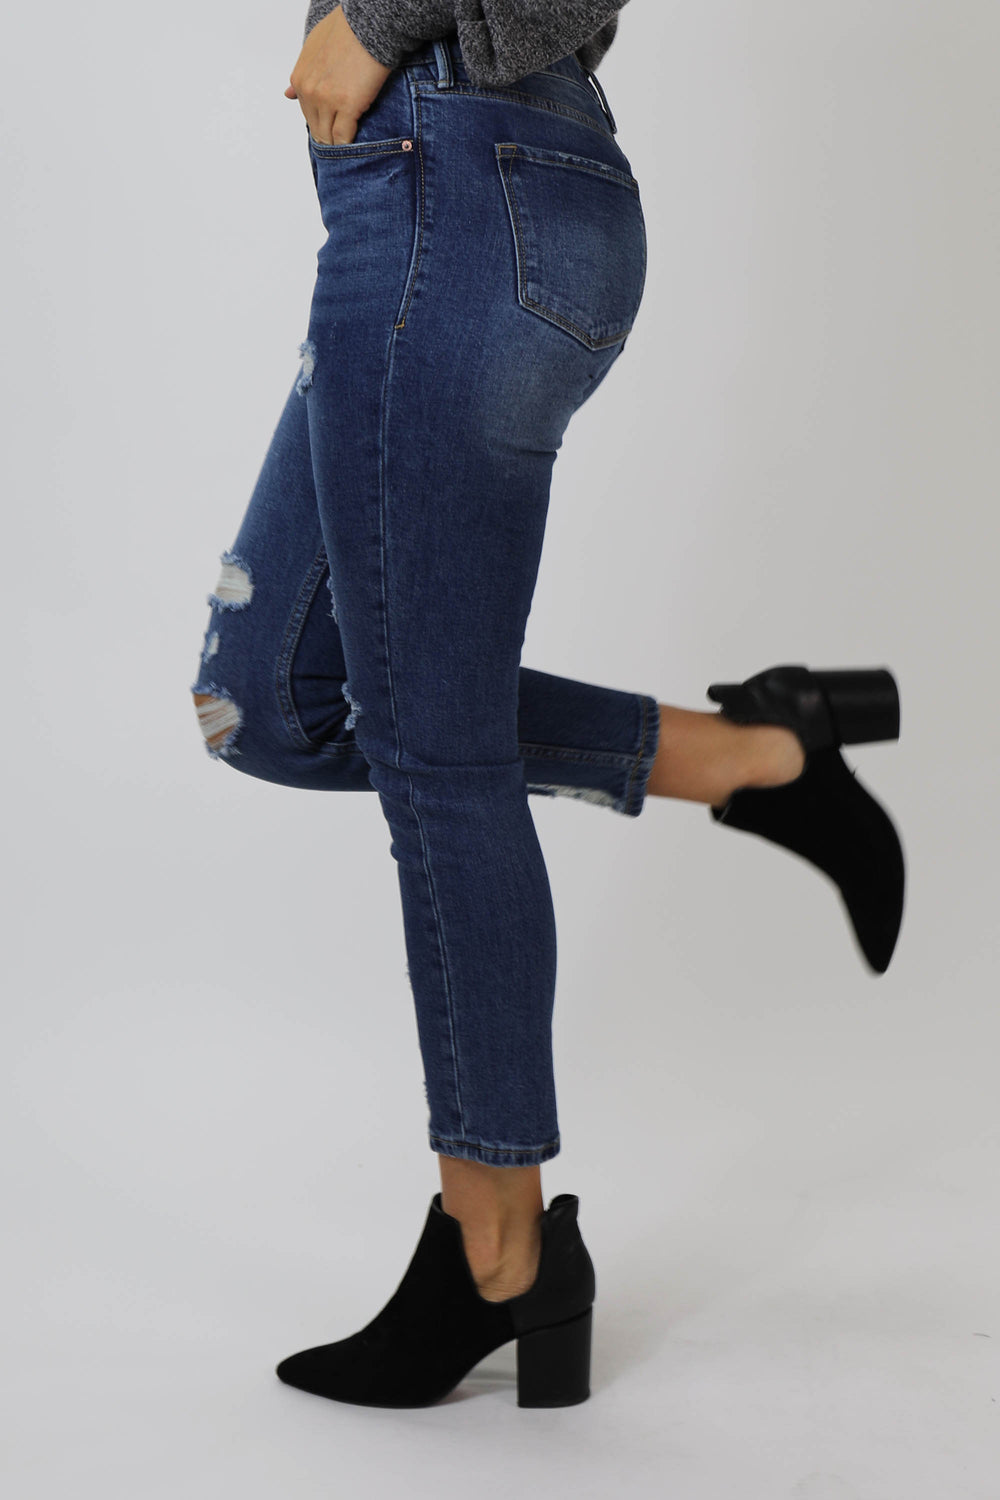 image of a female model wearing a AIDEN HIGH RISE GIRLFRIEND JEANS SACRAMENTO JEANS